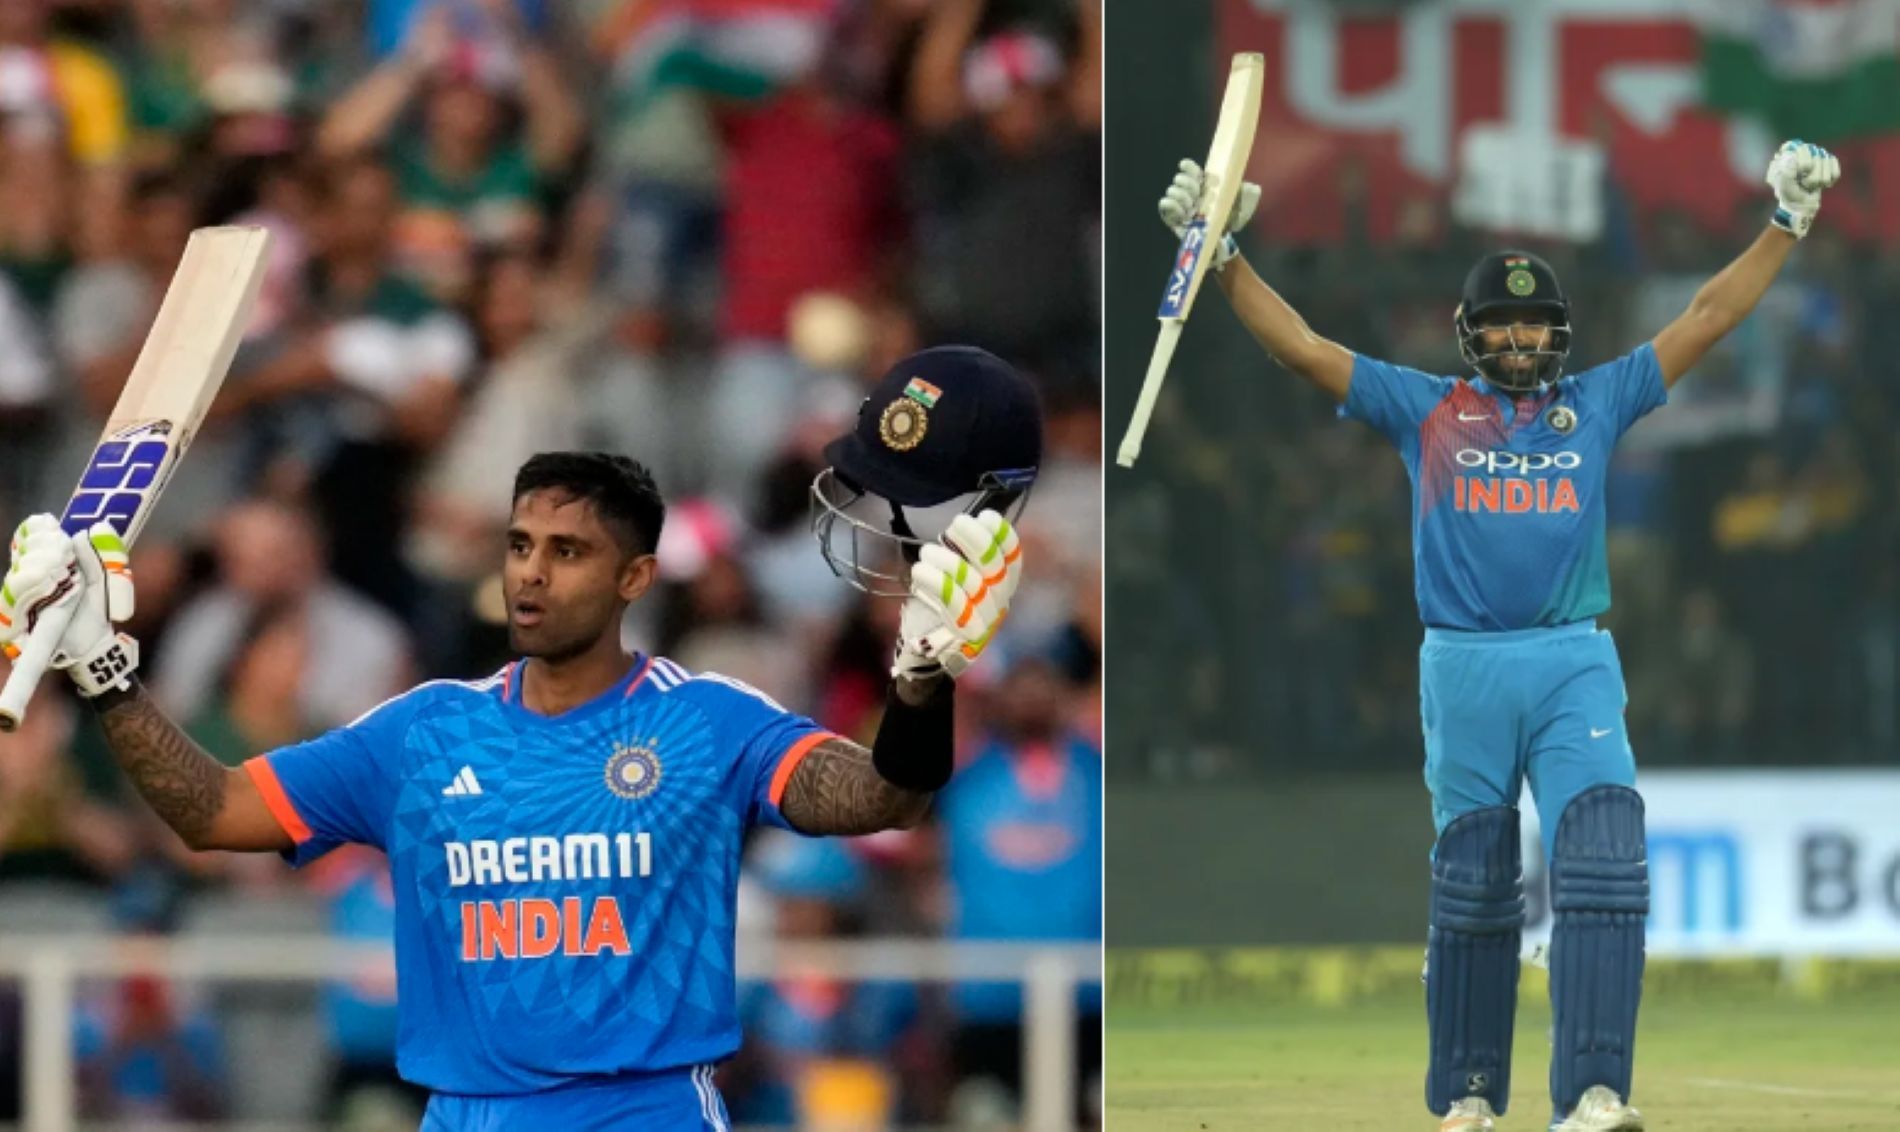 Indian captains have risen to the occasion with massive scores in T20Is